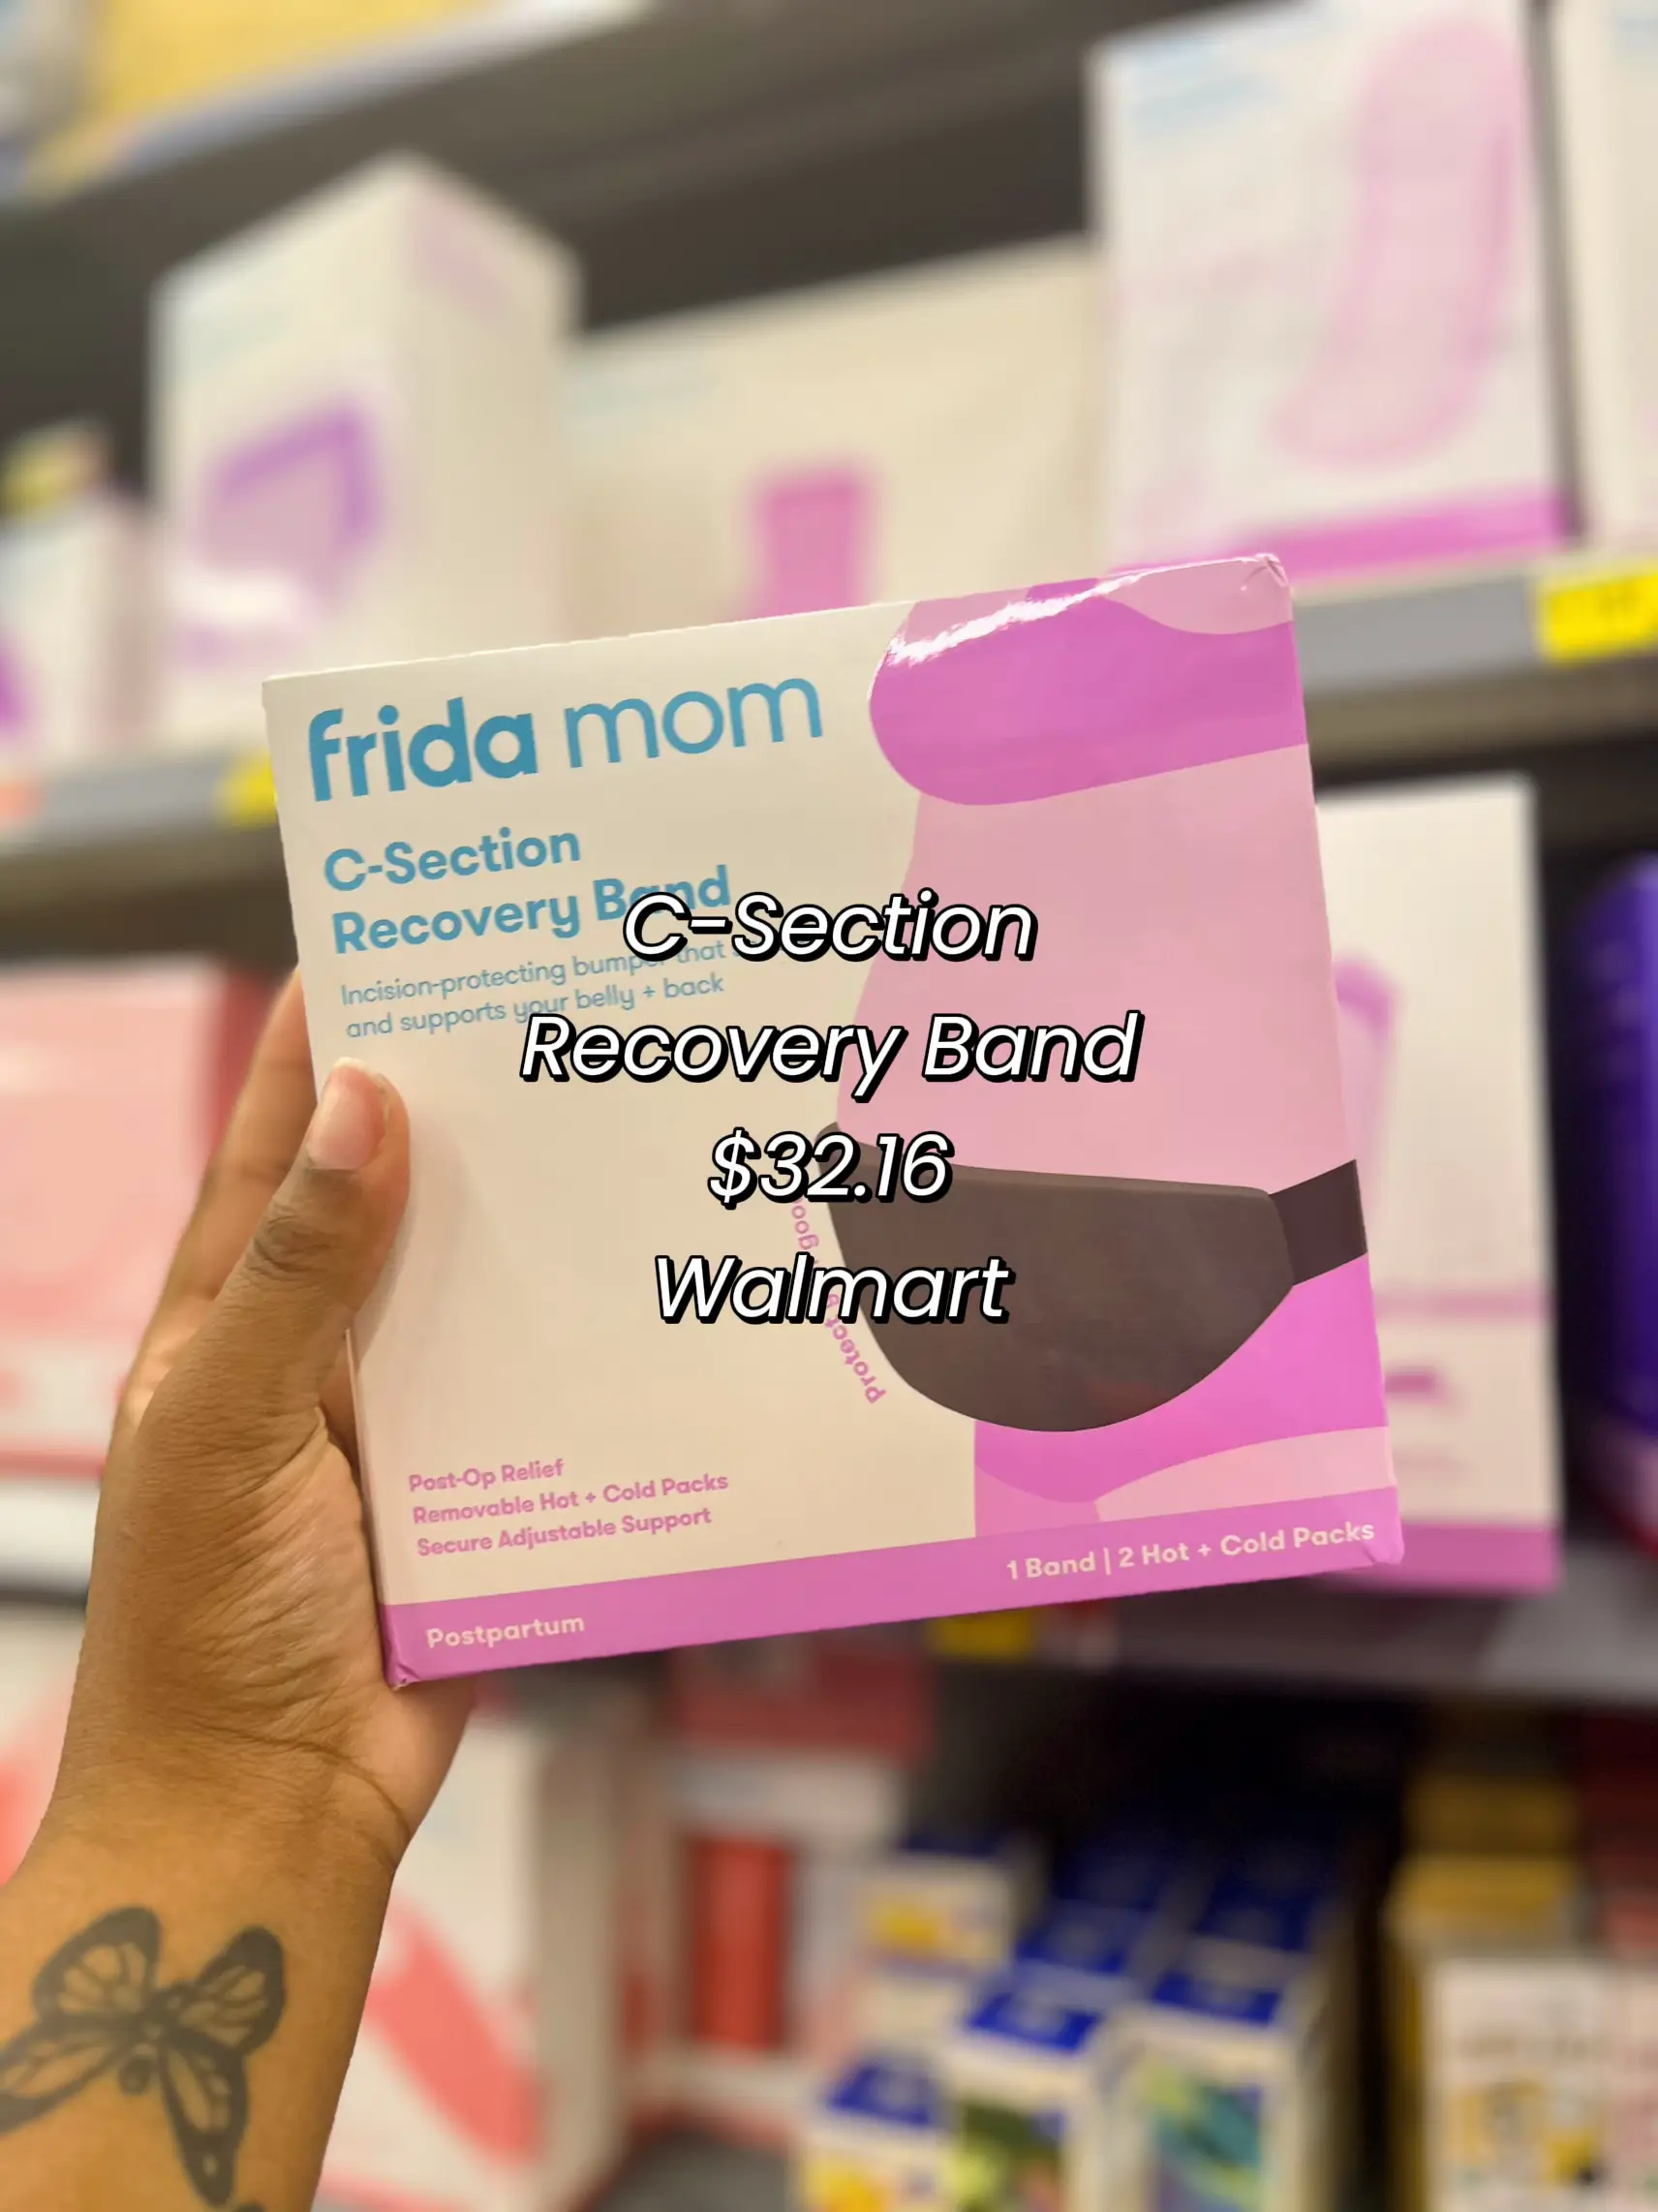 FRIDA MOM C-SECTION RECOVERY BAND INCISION PROTECTION WITH HOT & COLD PACKS